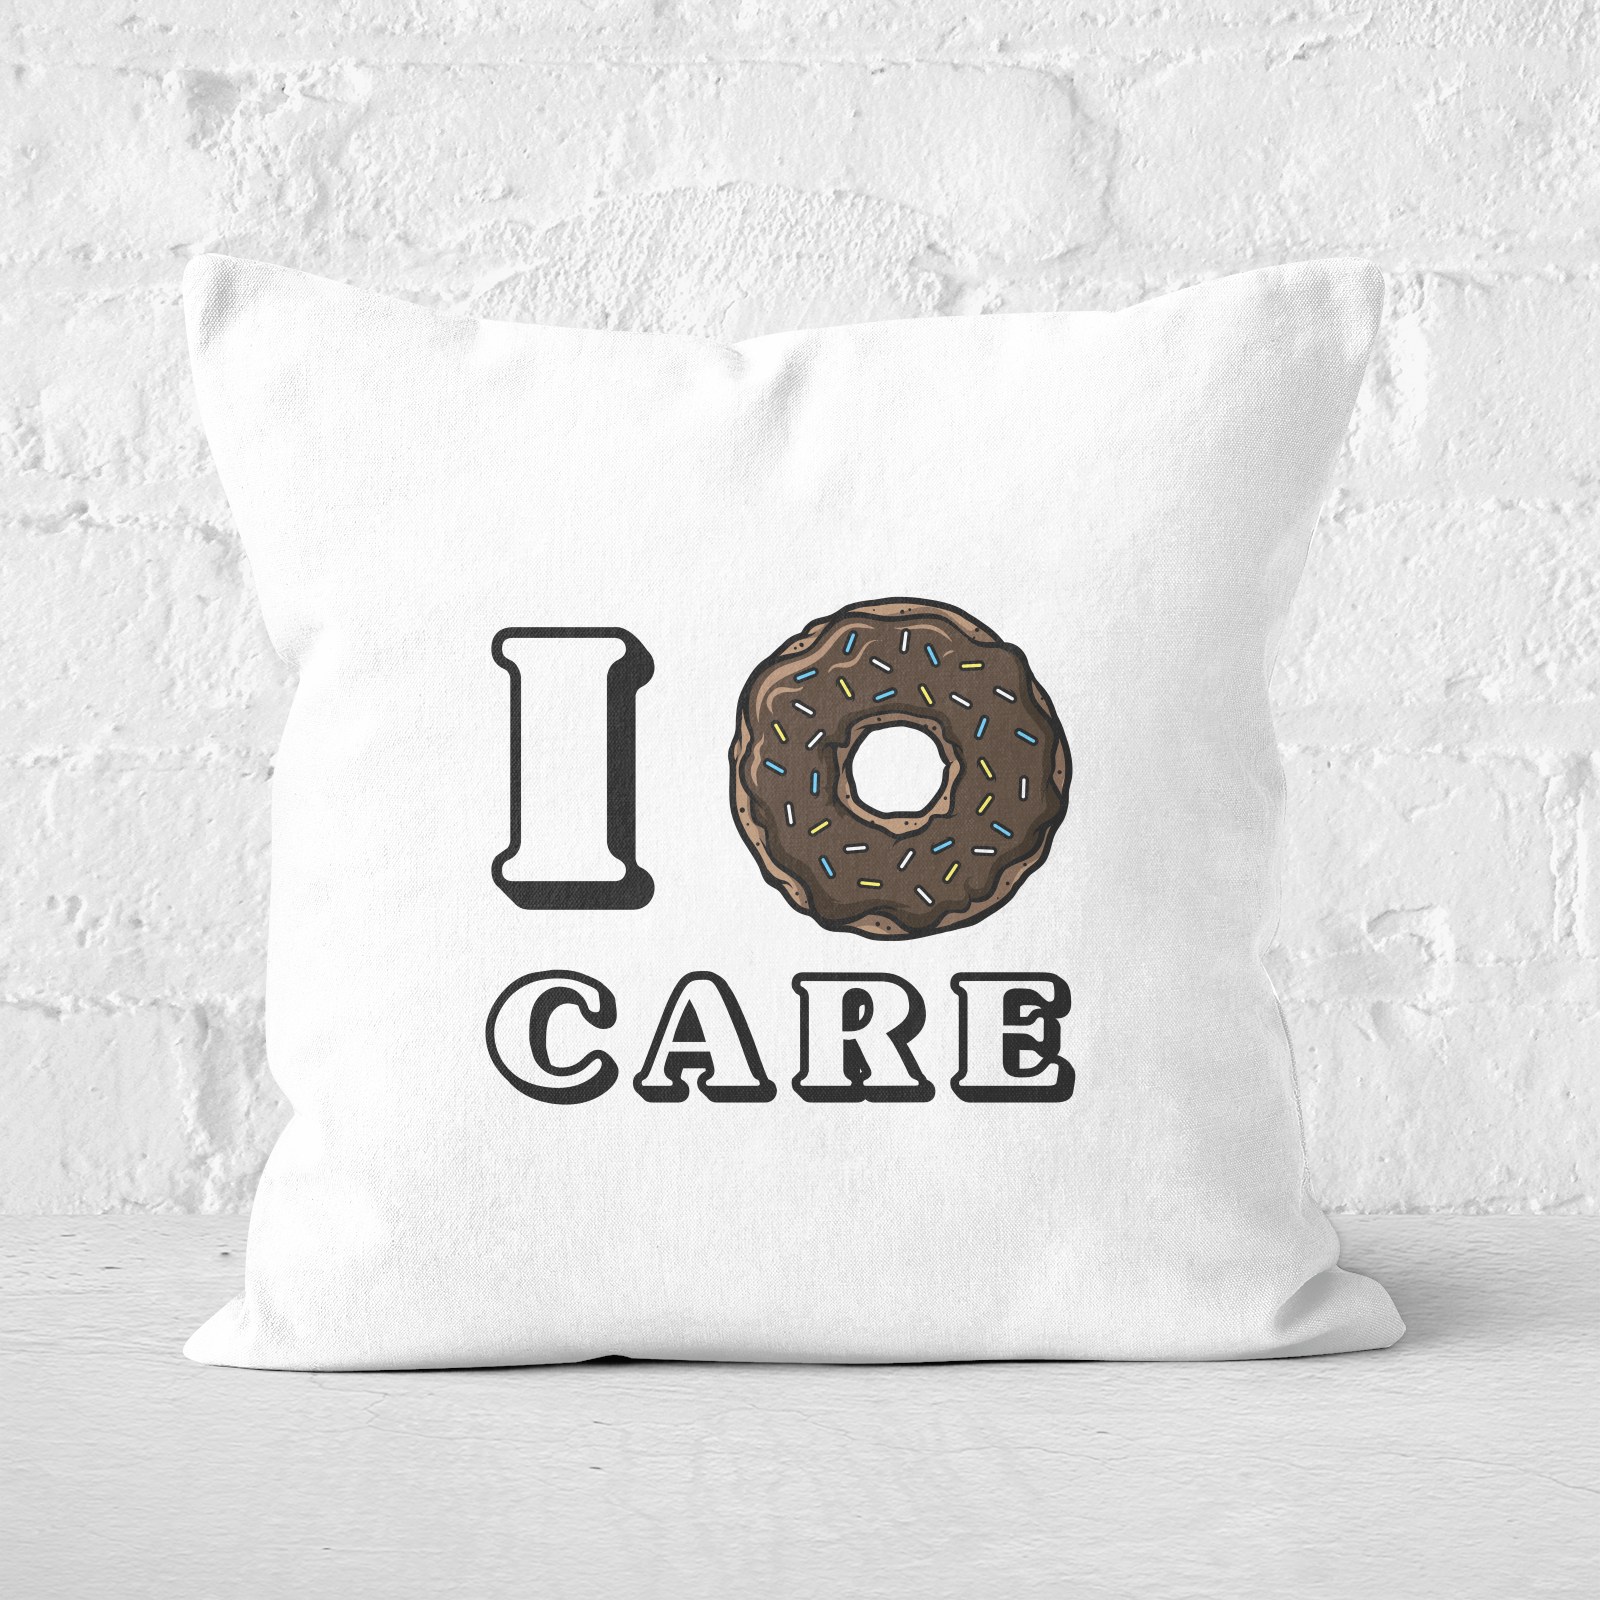 I Donut Care Square Cushion - 60x60cm - Soft Touch